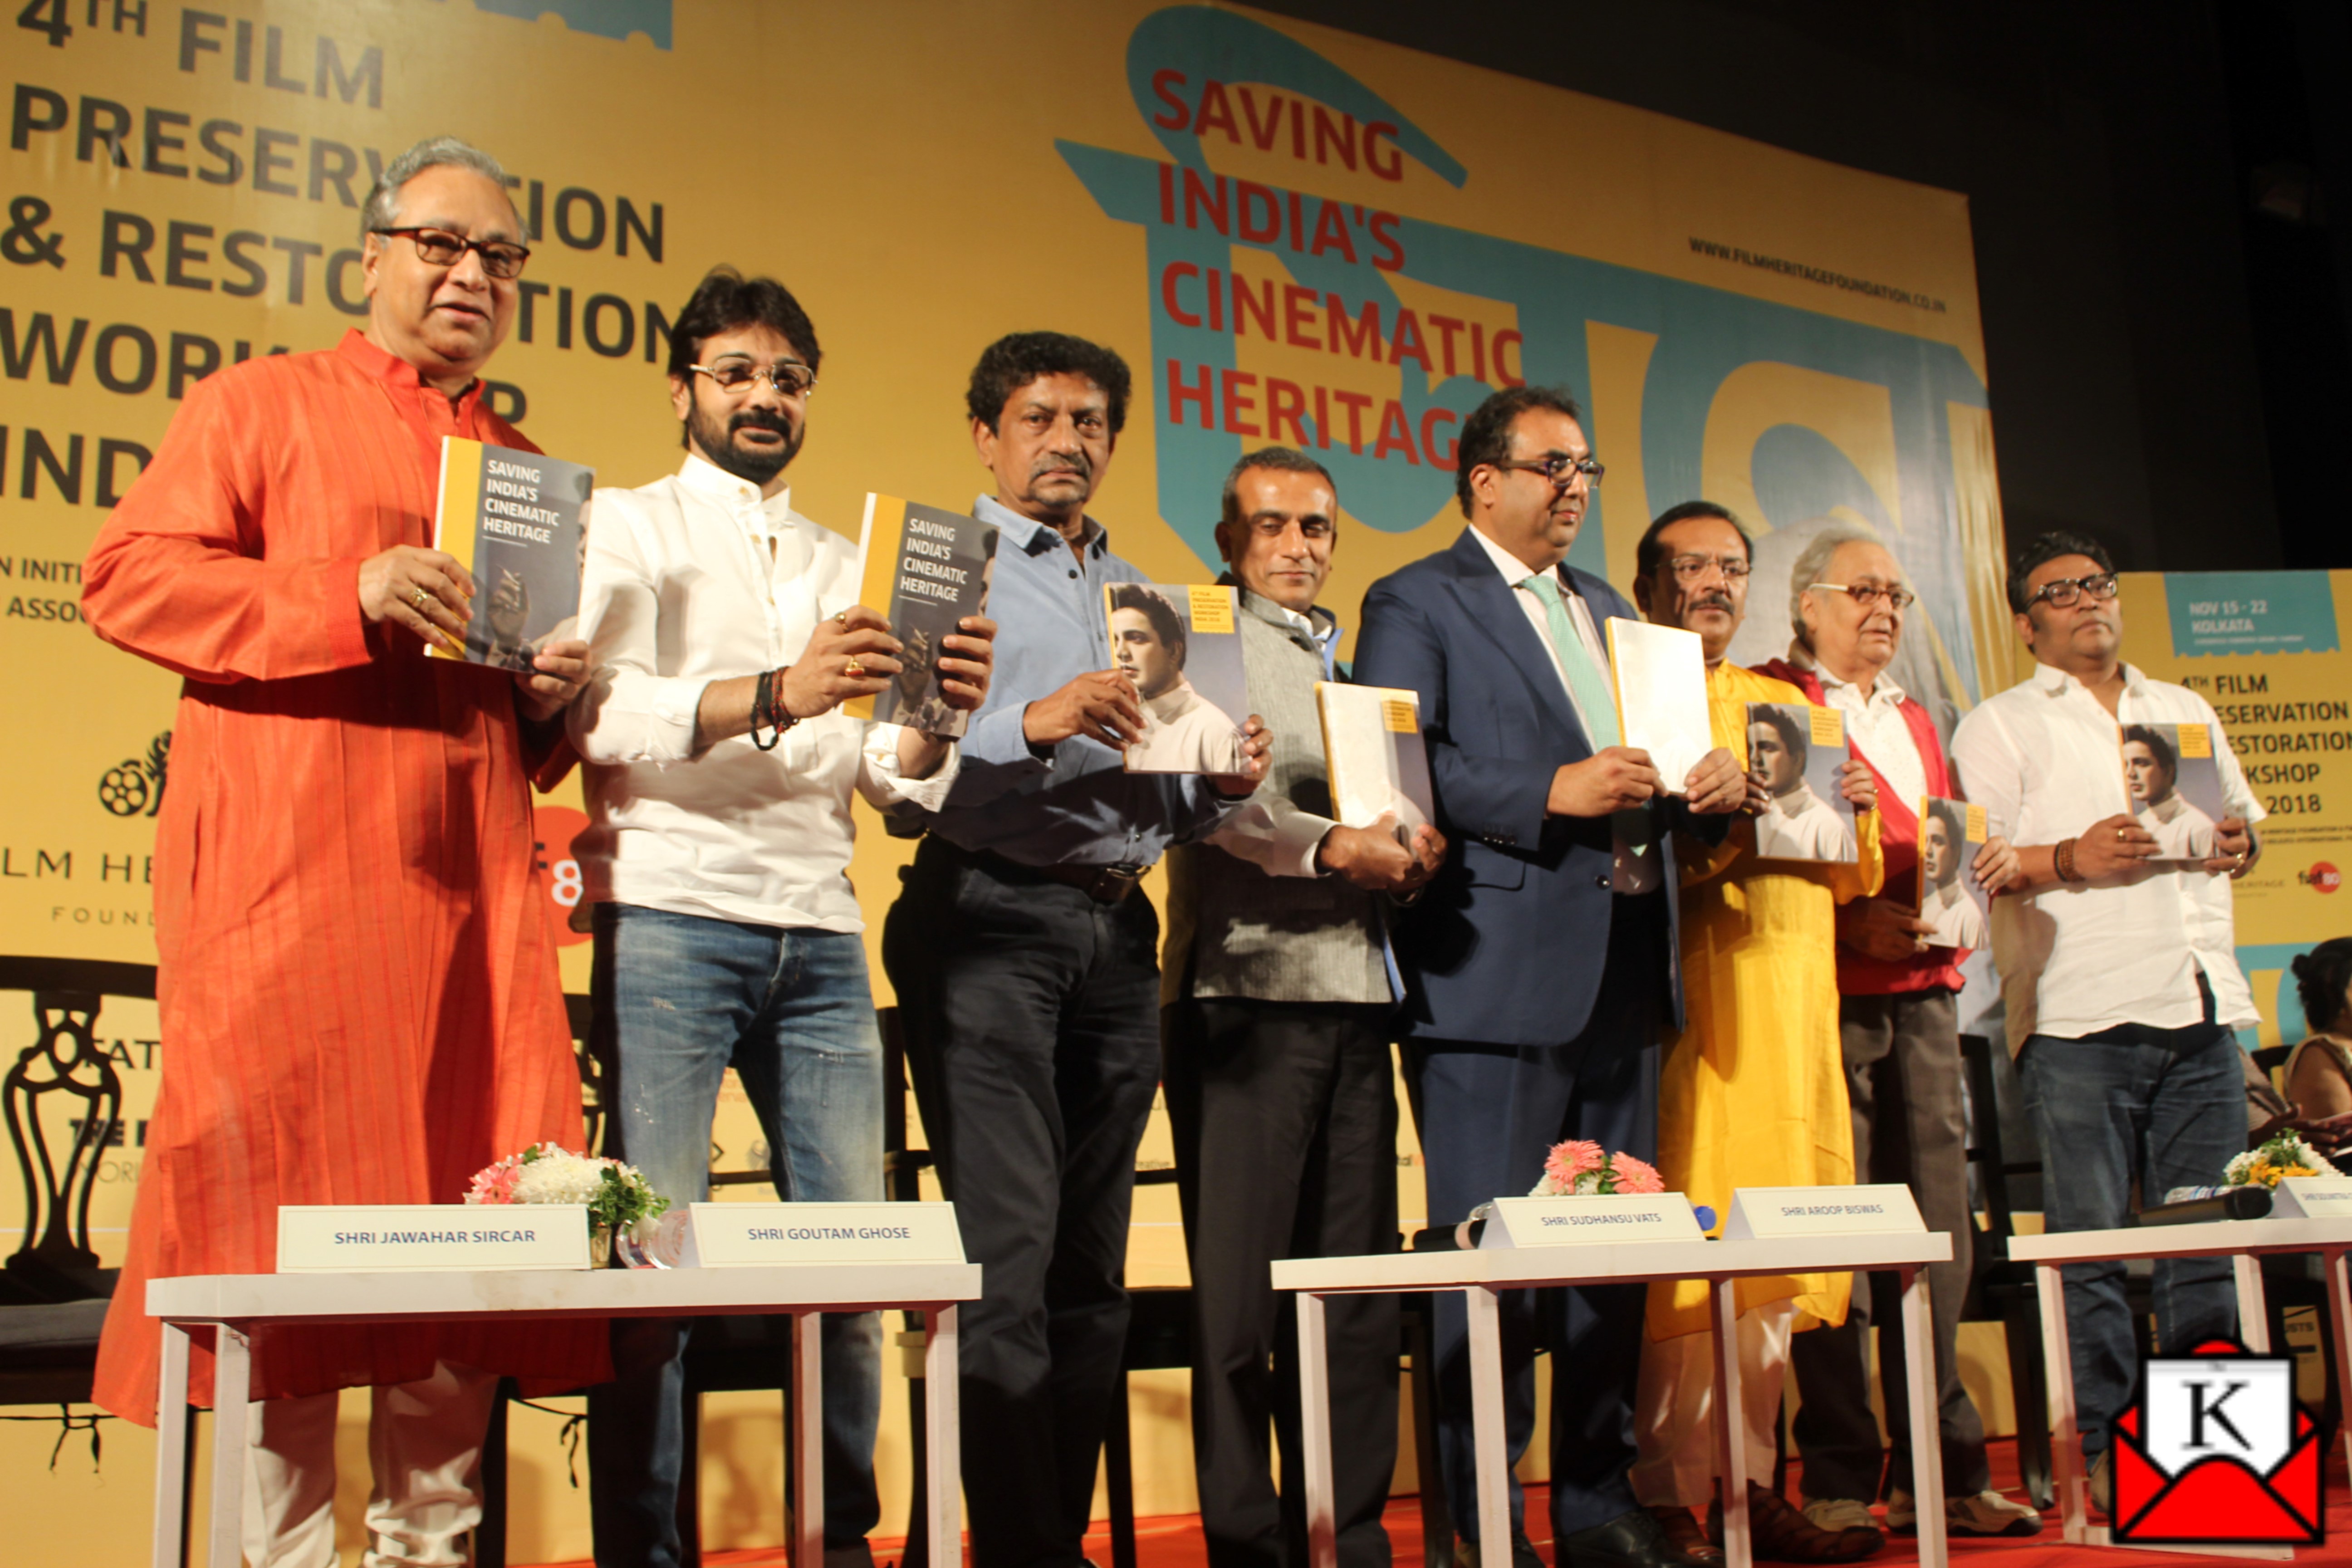 4th Film Preservation and Restoration Workshop India 2018 Inaugurated